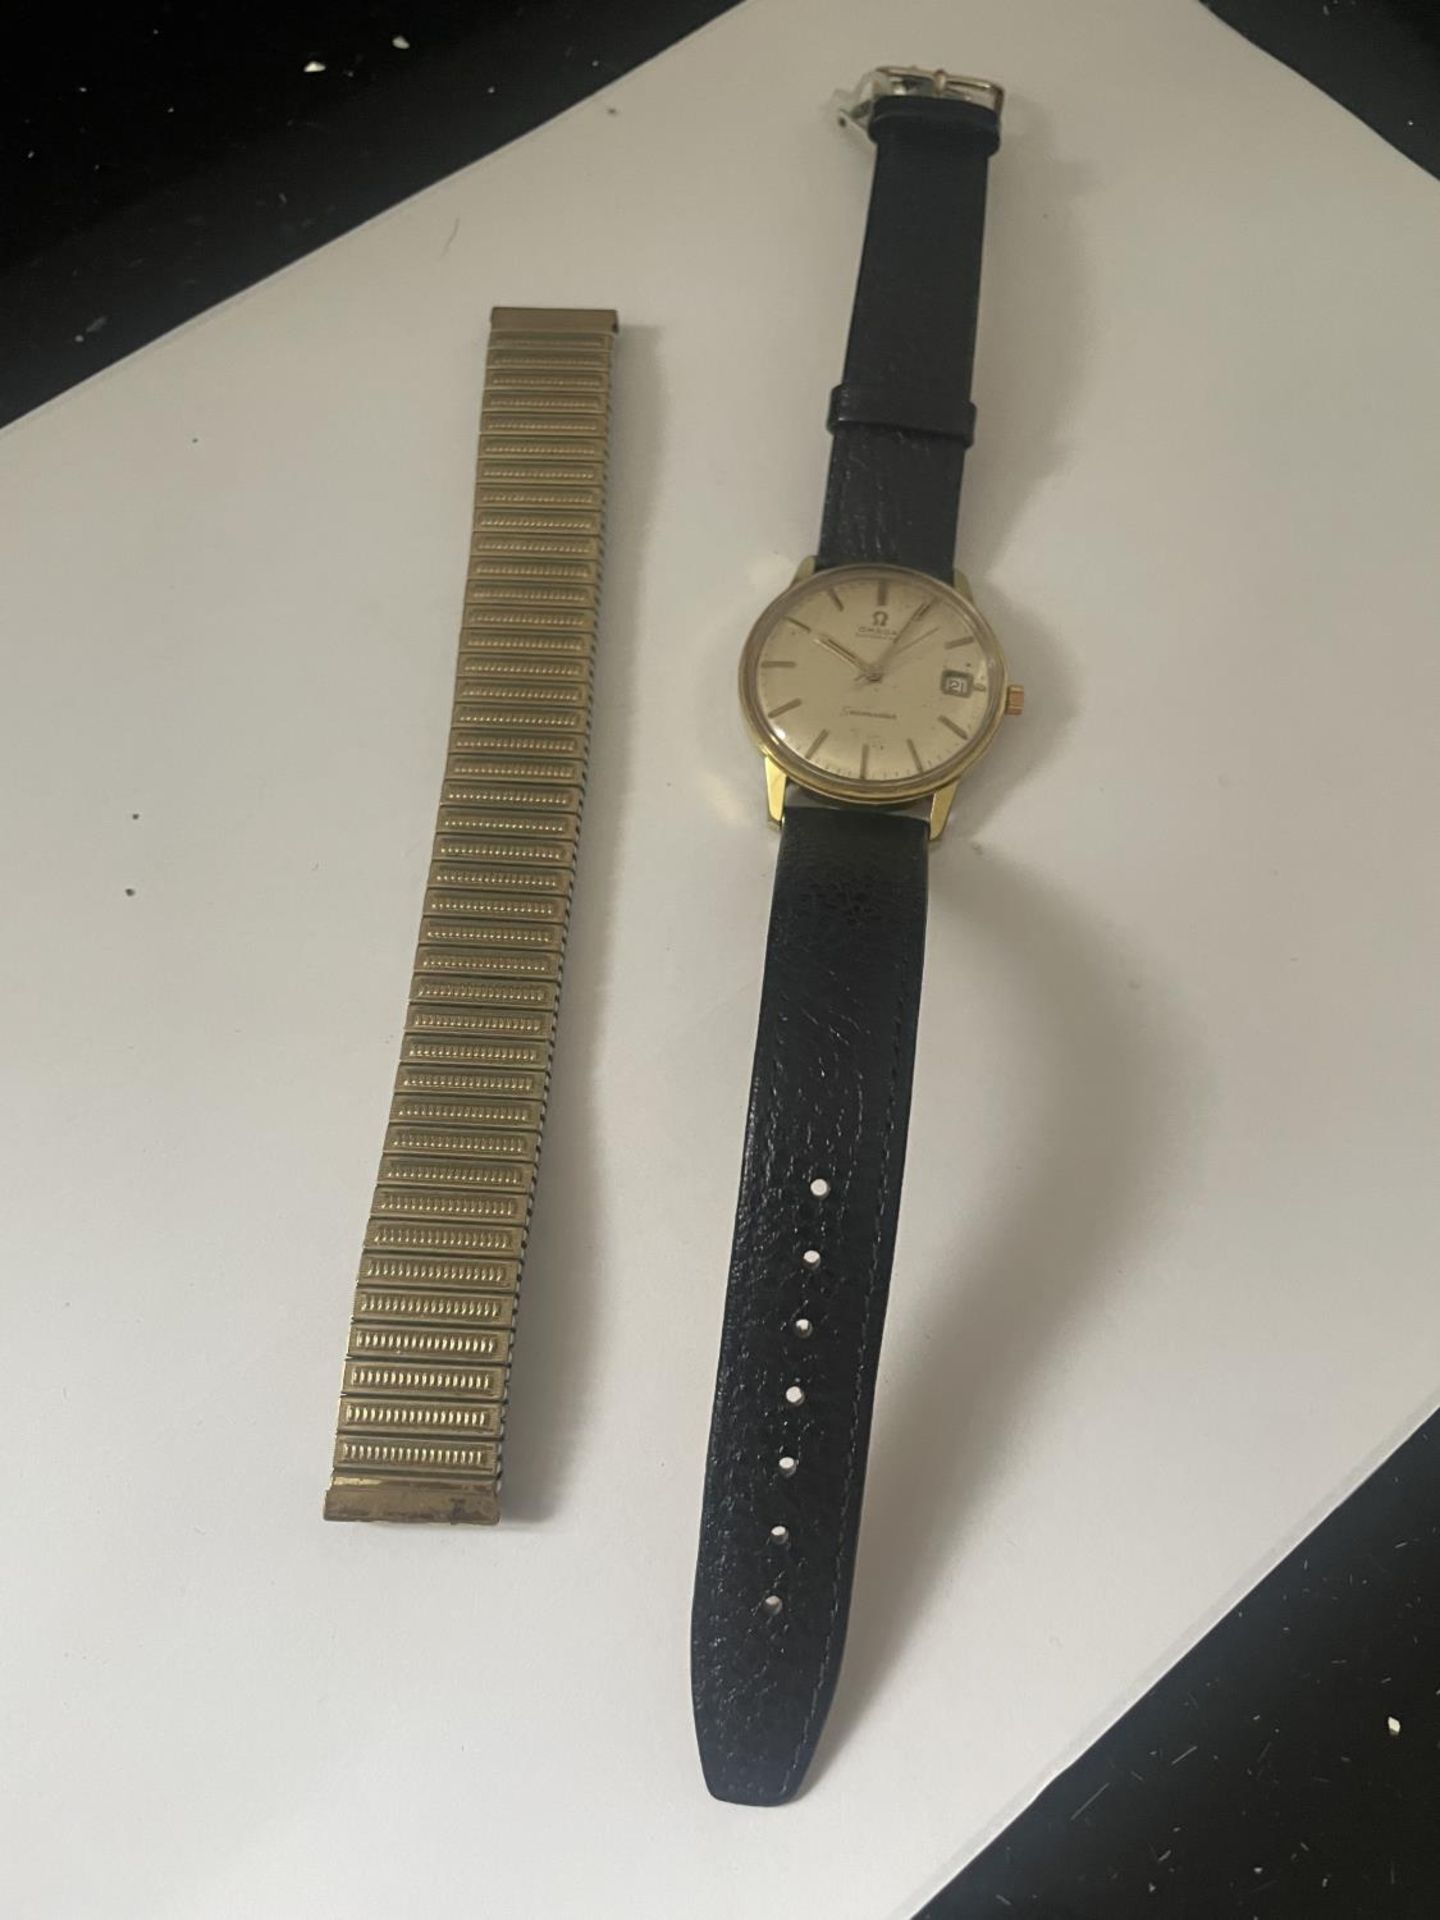 A 1968 OMEGA SEAMASTER WATCH WITH ORIGINAL GUARANTEE, BOX, LEATHER STRAP AND METAL STRAP, SERVICE - Image 2 of 7